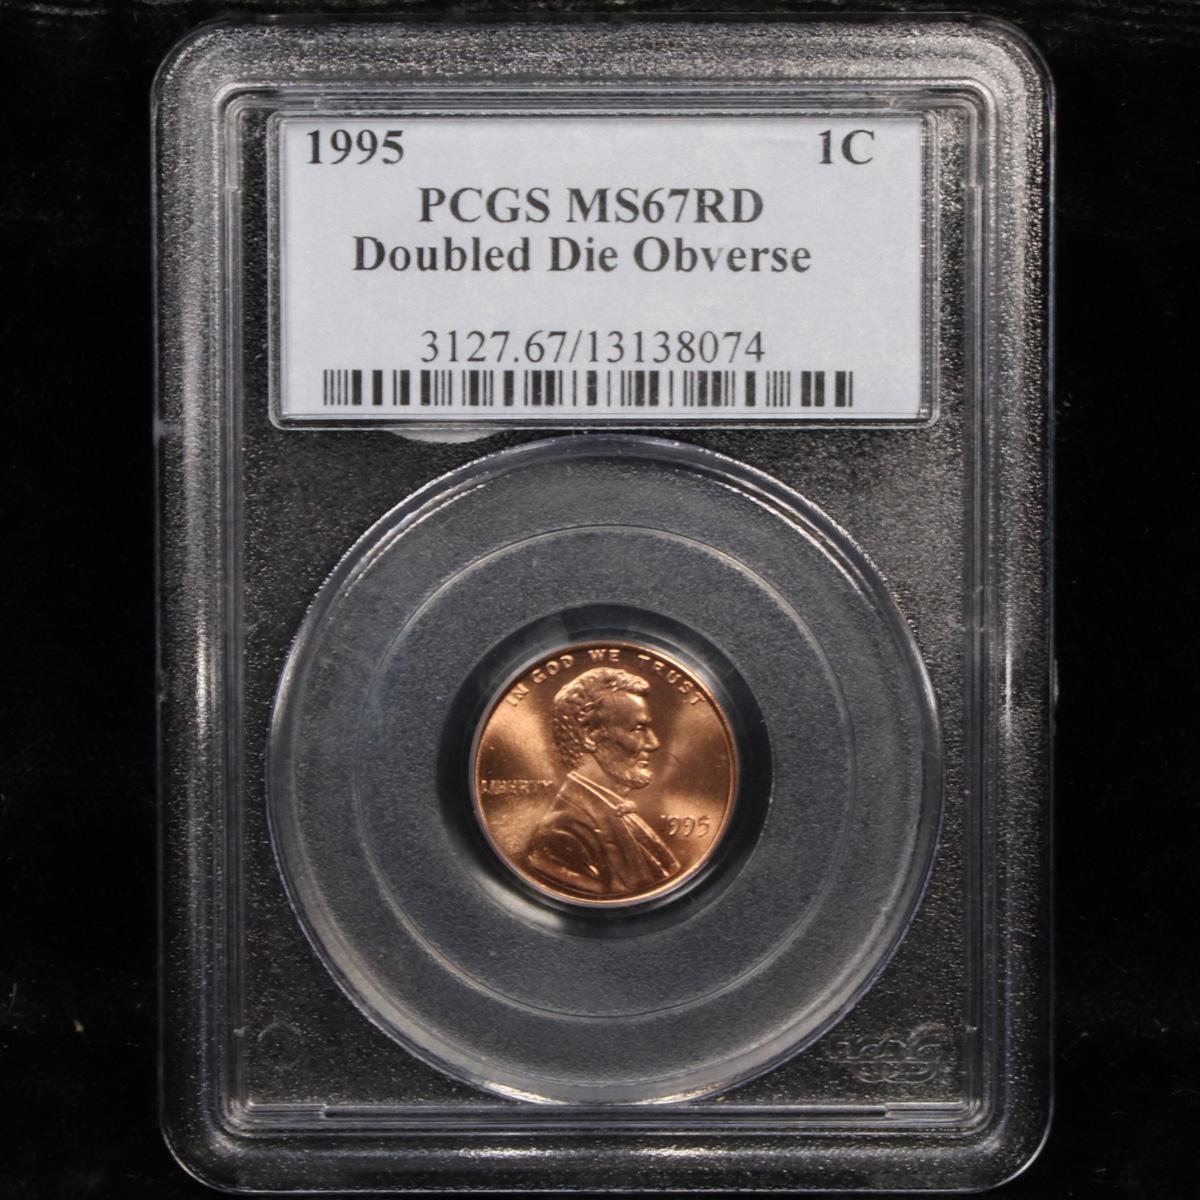 PCGS 1995/1995 DDO Lincoln Cent 1c Graded ms67 rd By PCGS